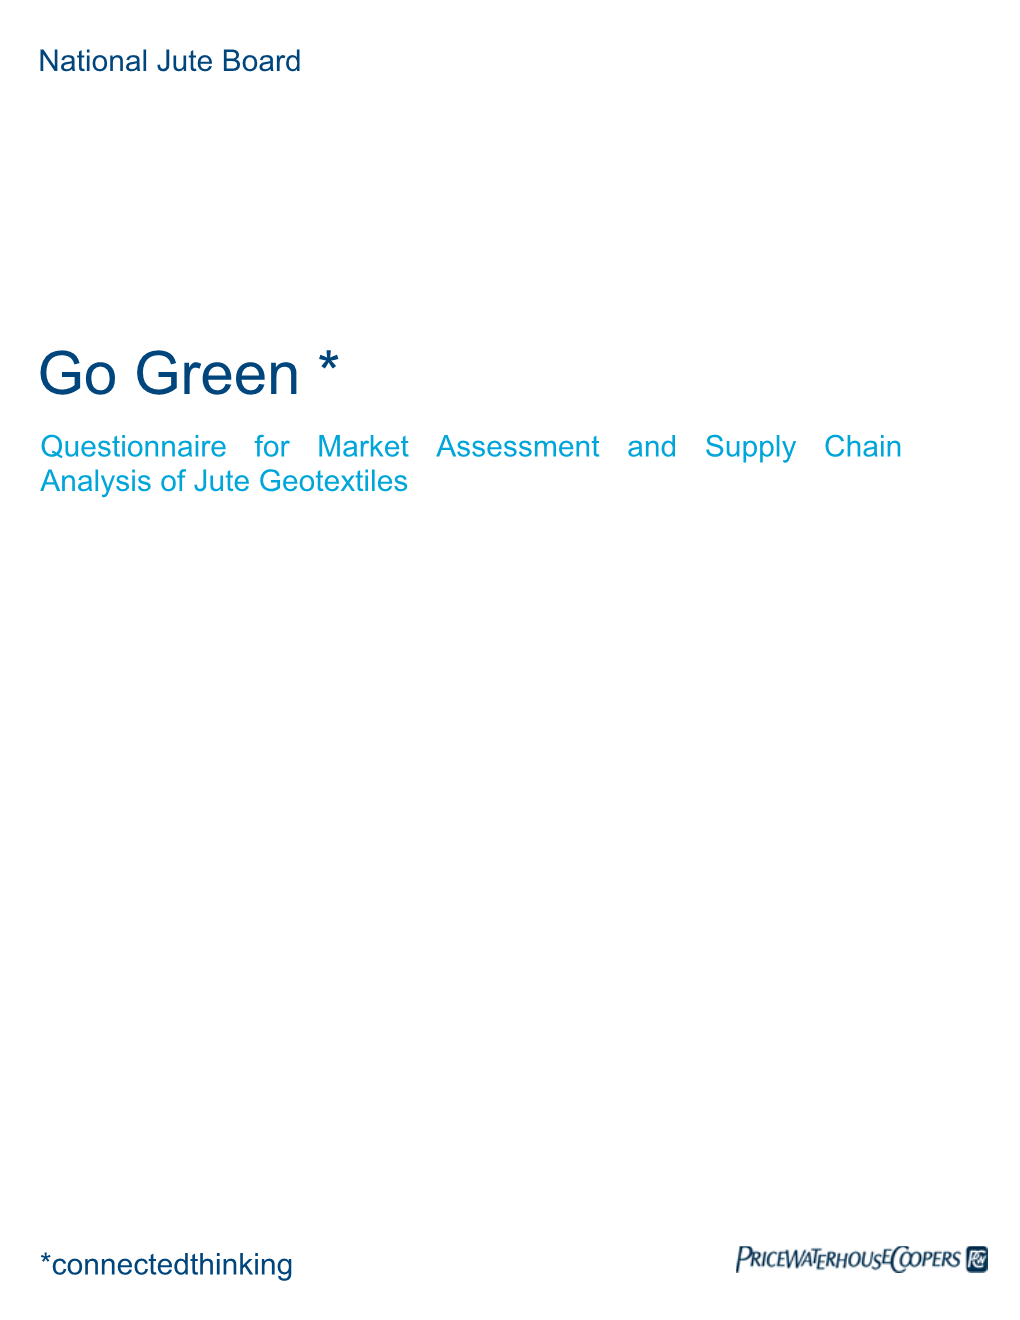 Questionnaire for Market Assessment and Supply Chain Analysis of Jute Geotextile